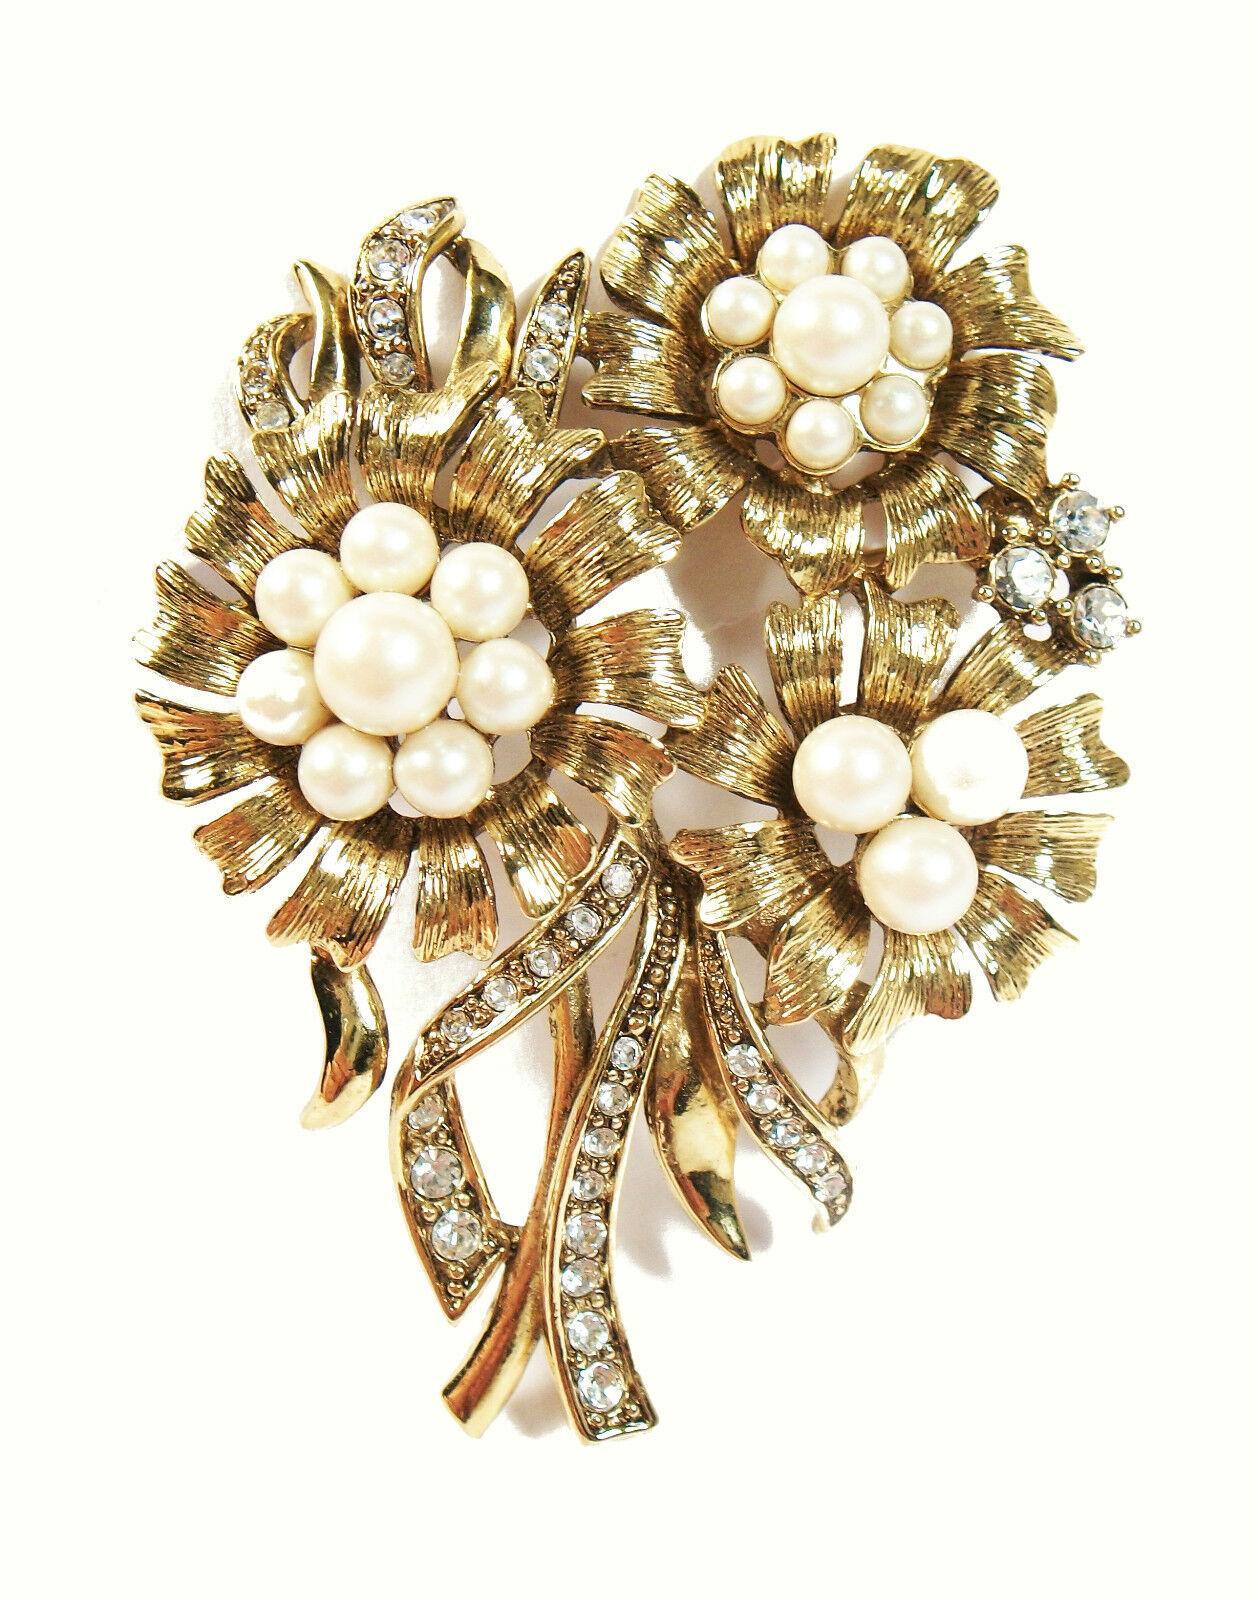 MONET - Vintage gold tone flower brooch - set with faux pearls and rhinestones - signed on the back - United States - circa 1960's.

Excellent/mint vintage condition - no loss - no damage - no repairs - ready to wear.

Size - 1 3/4